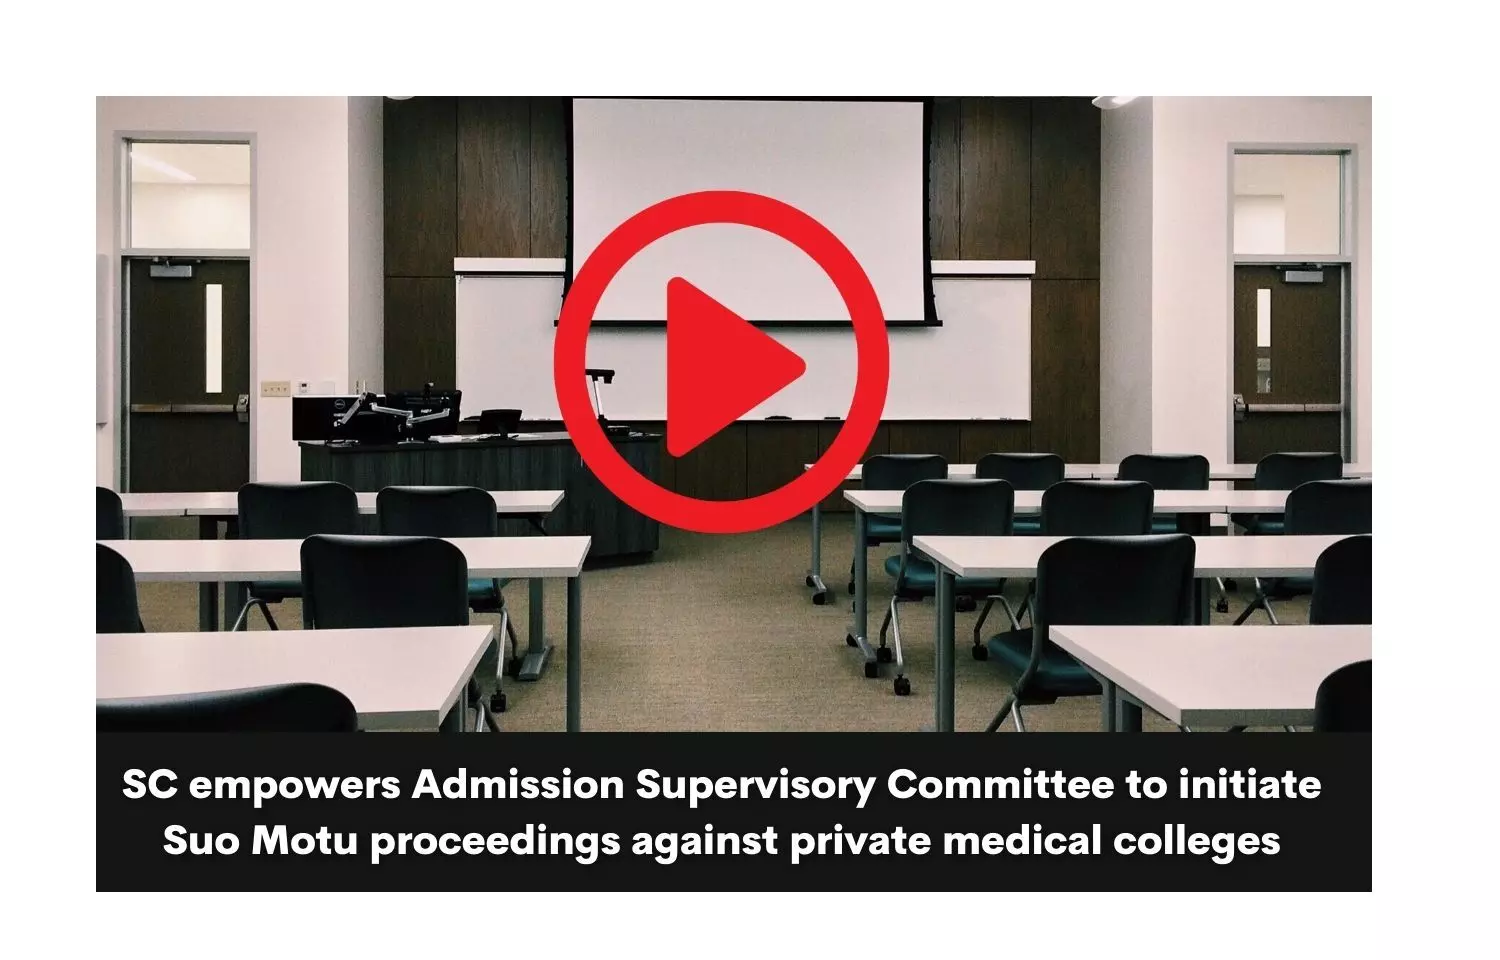 Admission Supervisory Committee to initiate suo motu action against private medical colleges: SC